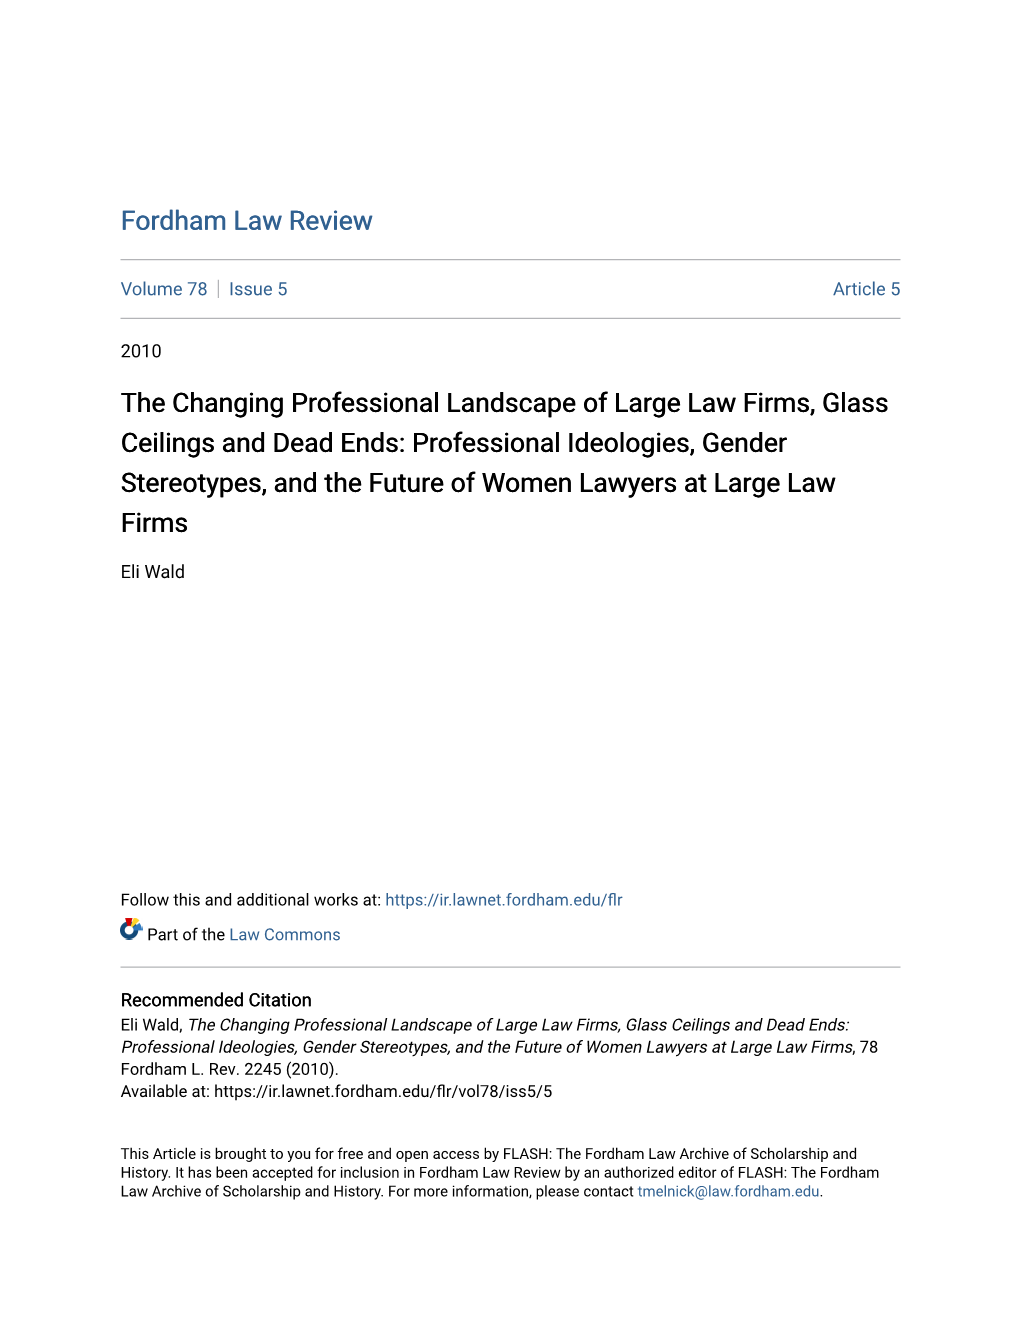 The Changing Professional Landscape of Large Law Firms